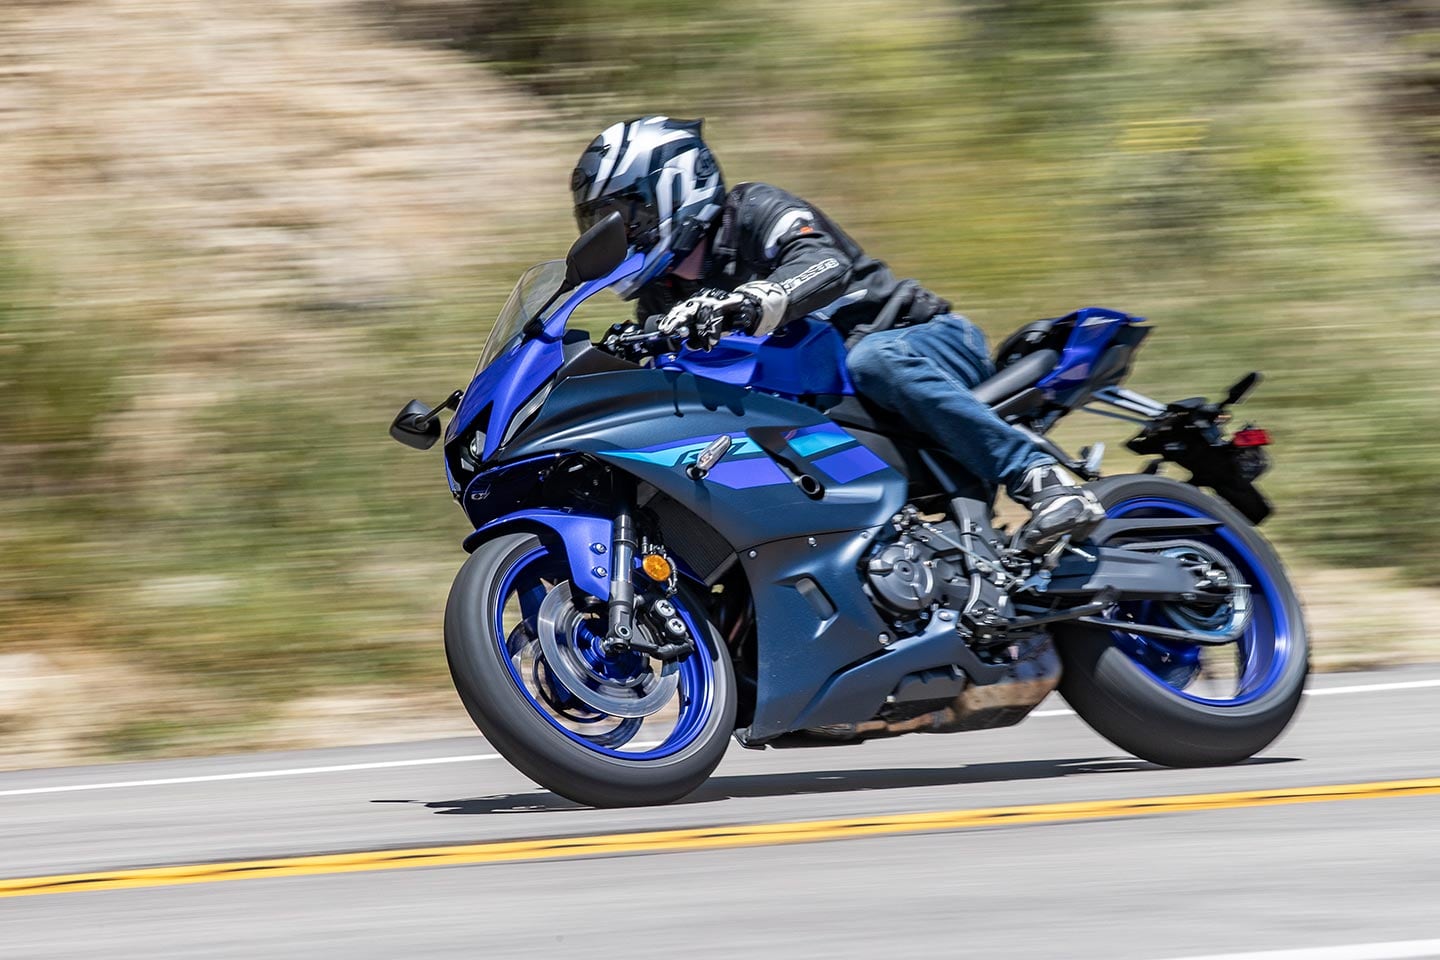 There is no question that the Yamaha has the most committed sportbike riding position.